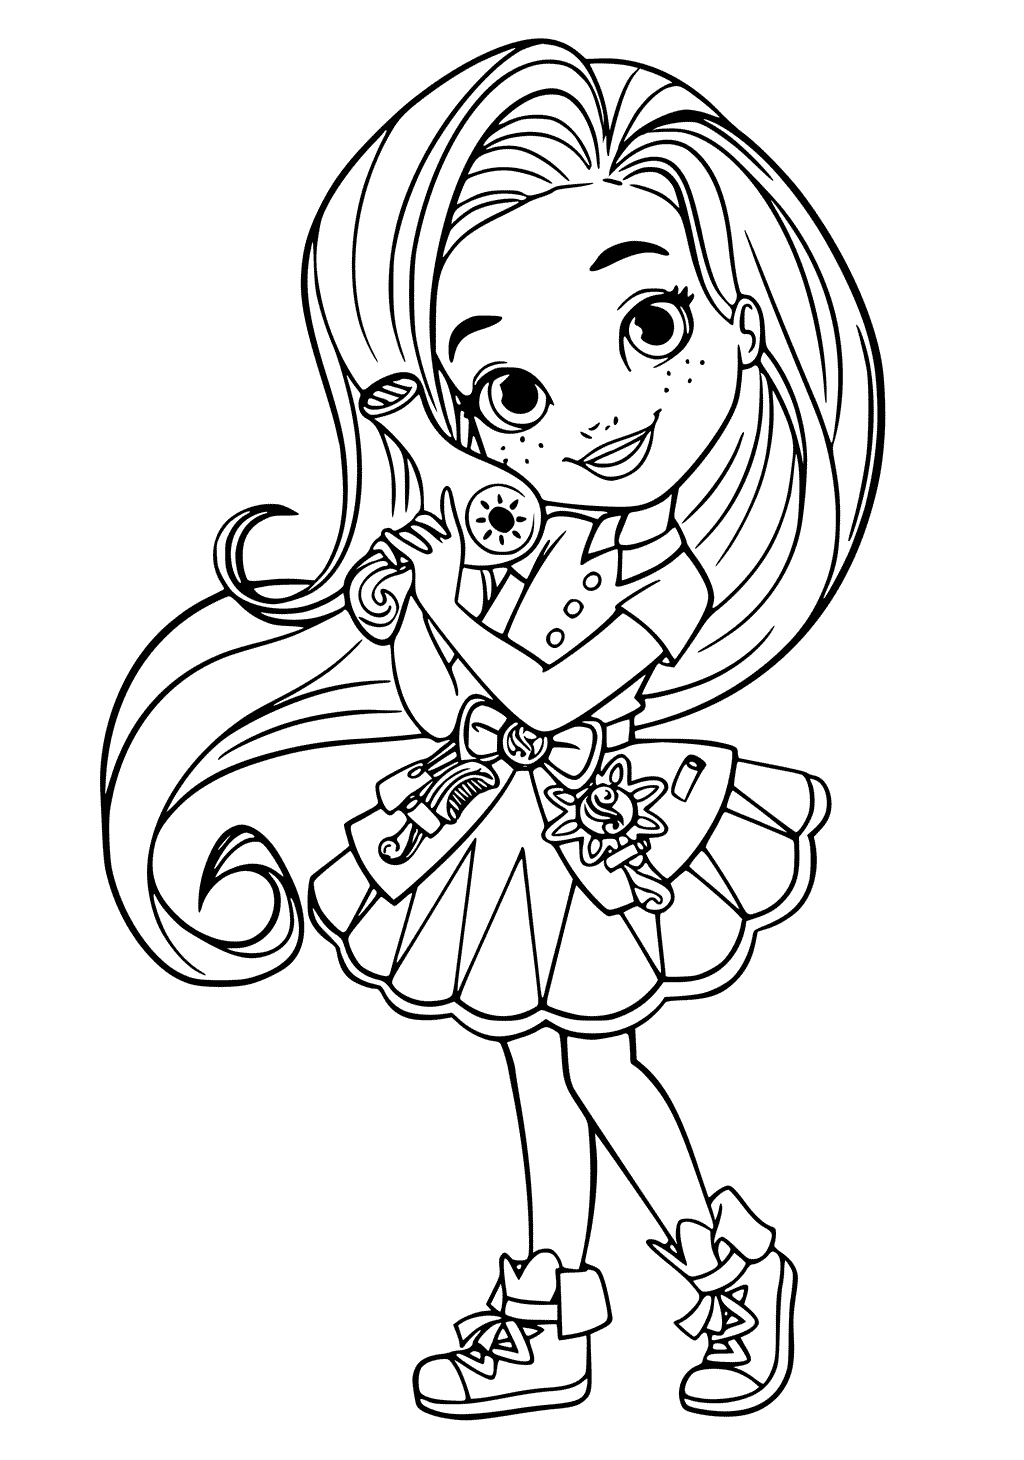 Girly Coloring Page